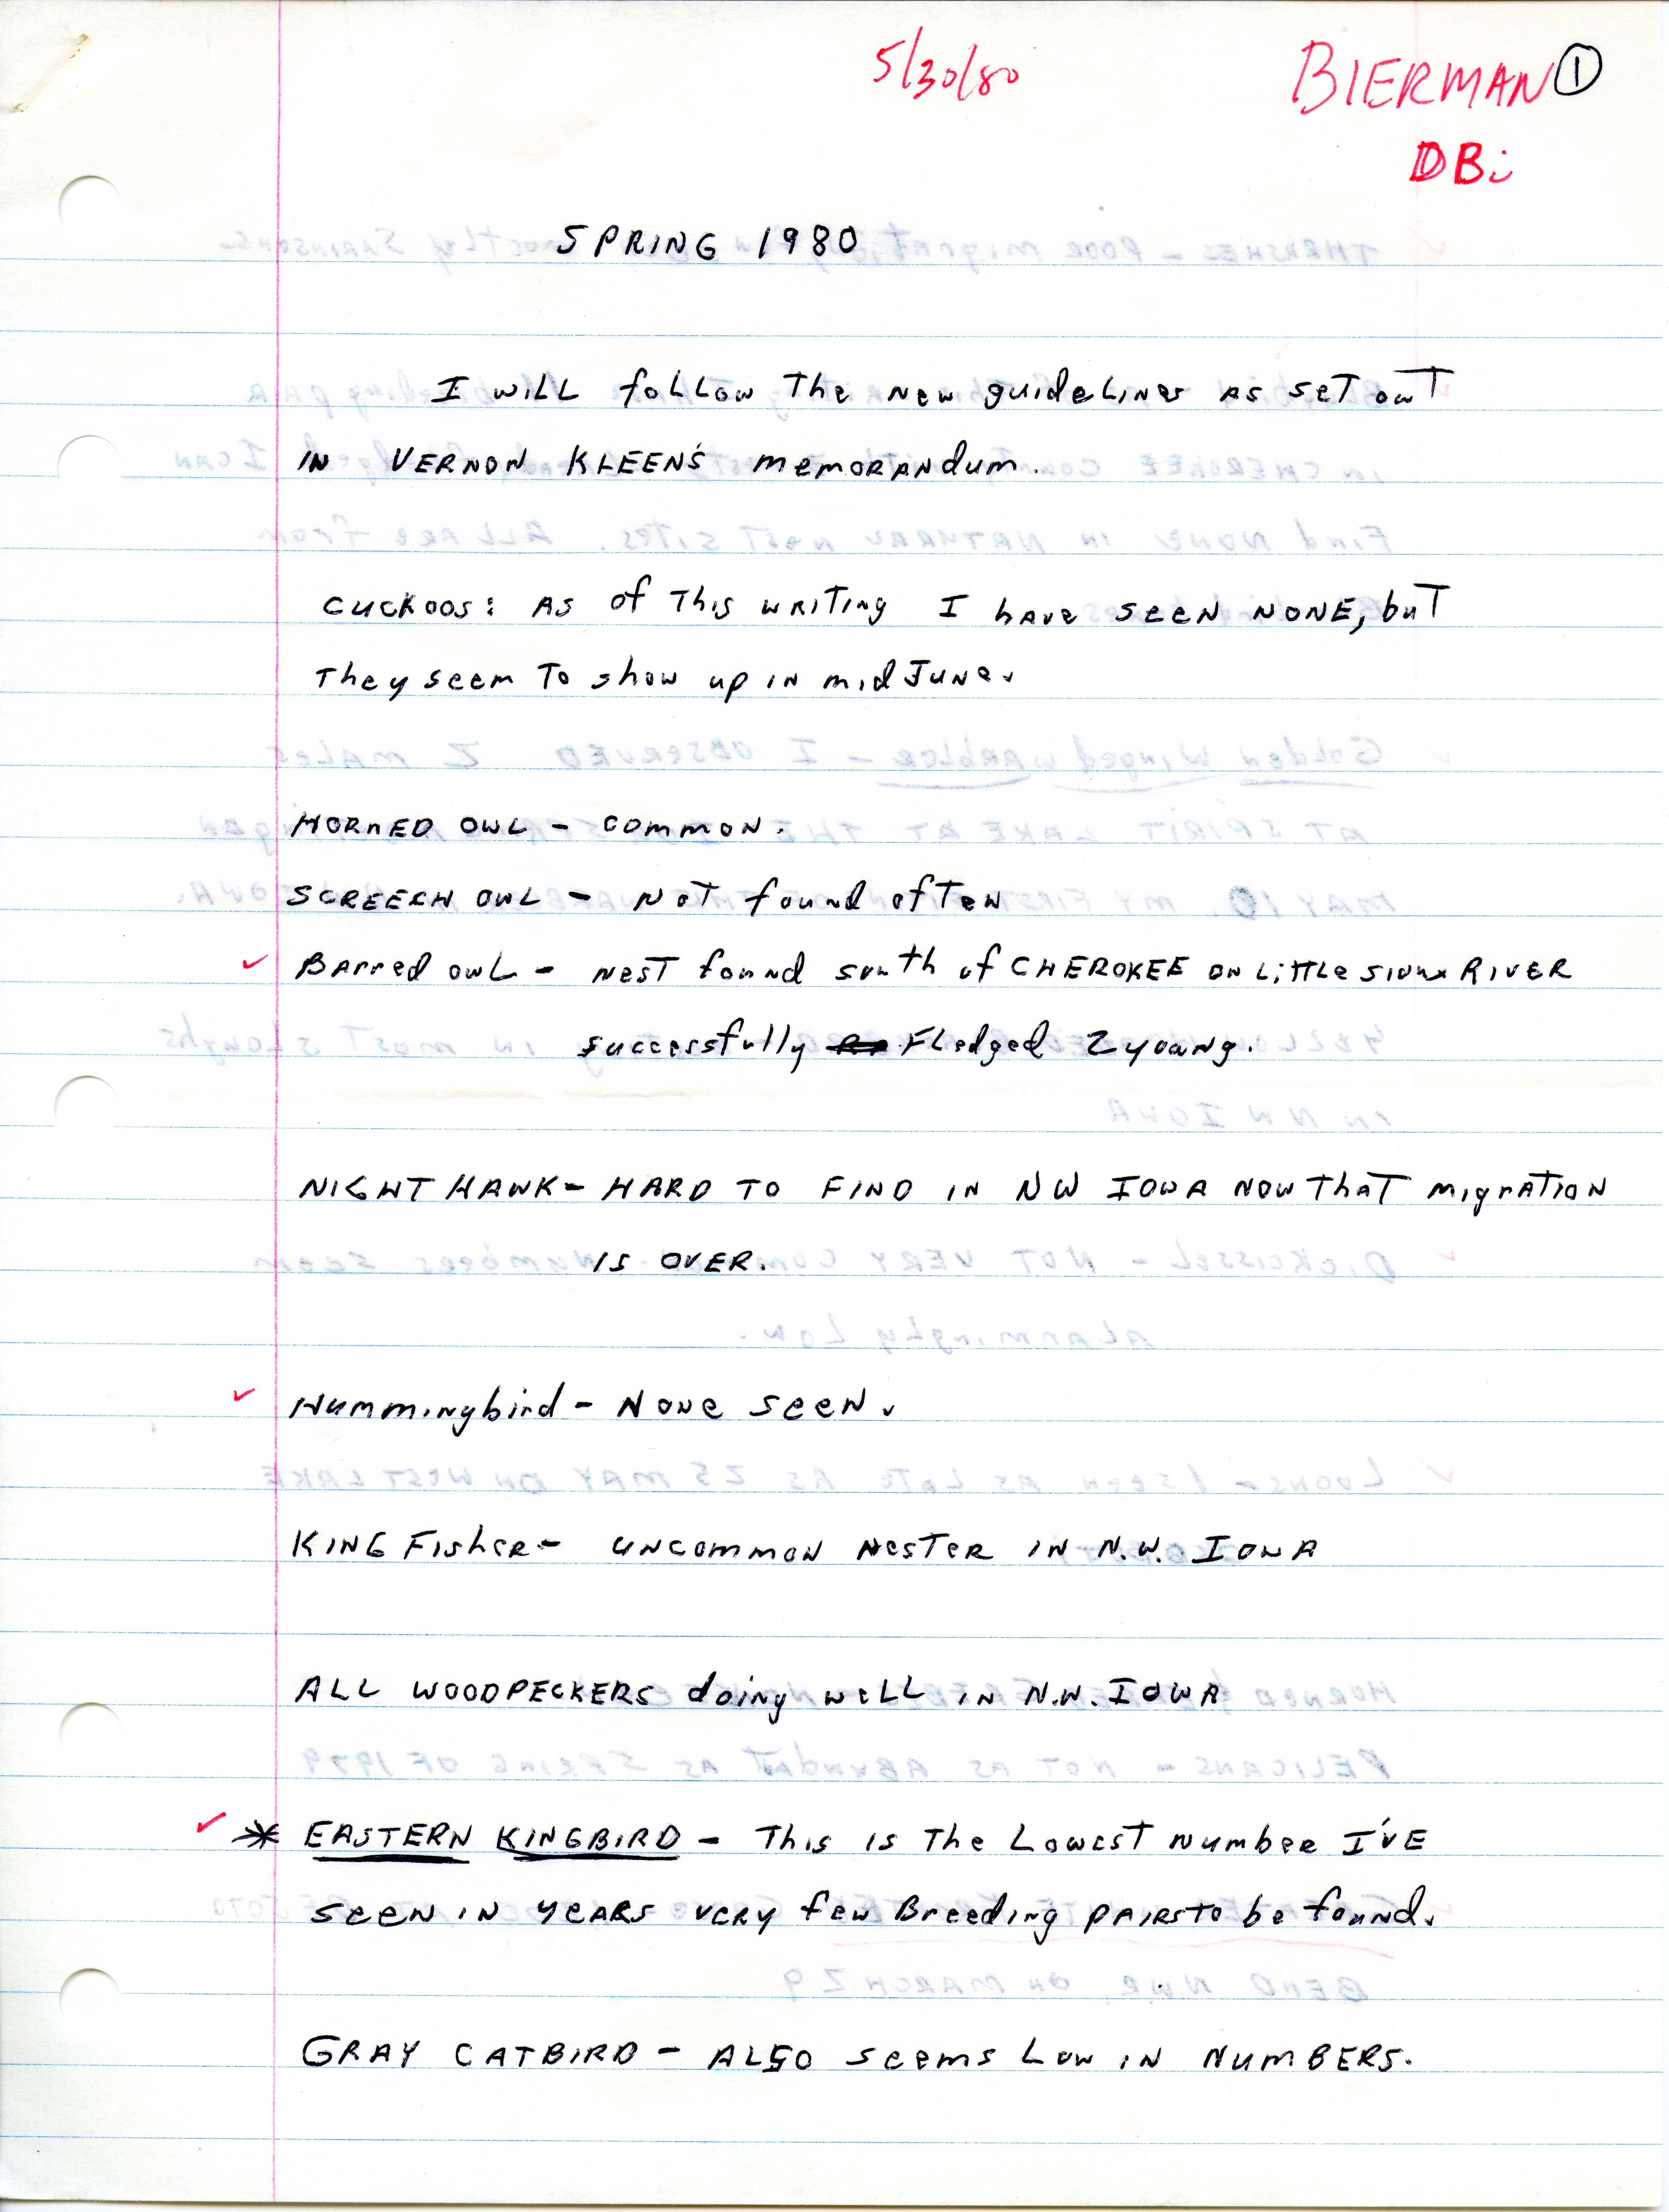 Field notes contributed by Dick Bierman, spring 1980